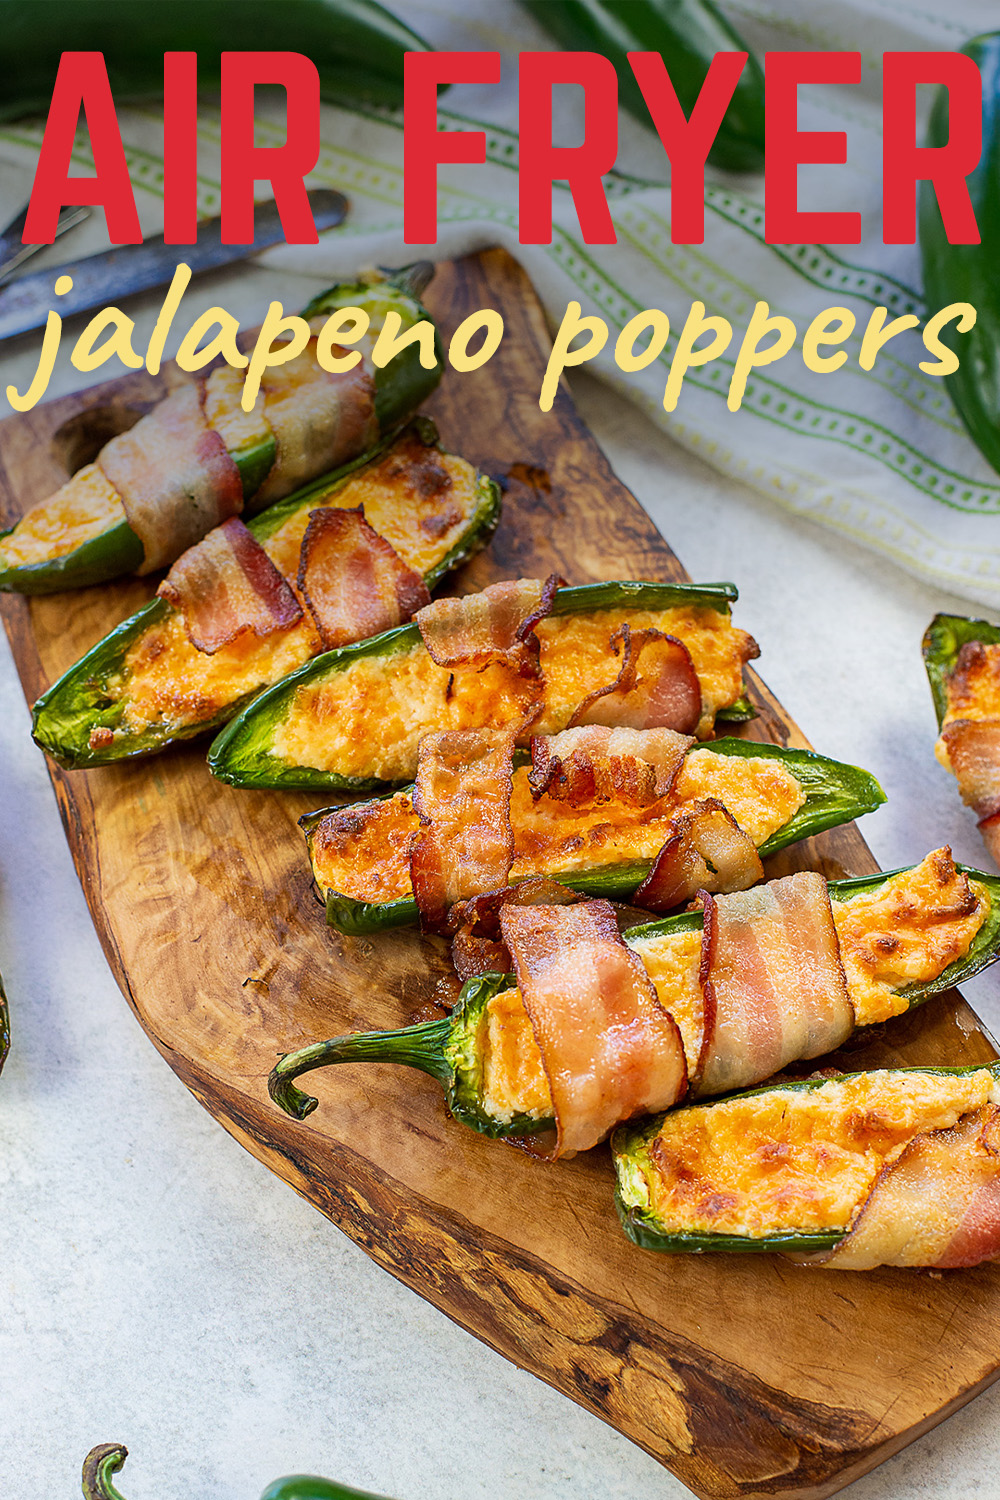 These bacon wrapped poppers are keto friendly and make for a great appetizer for everyone!